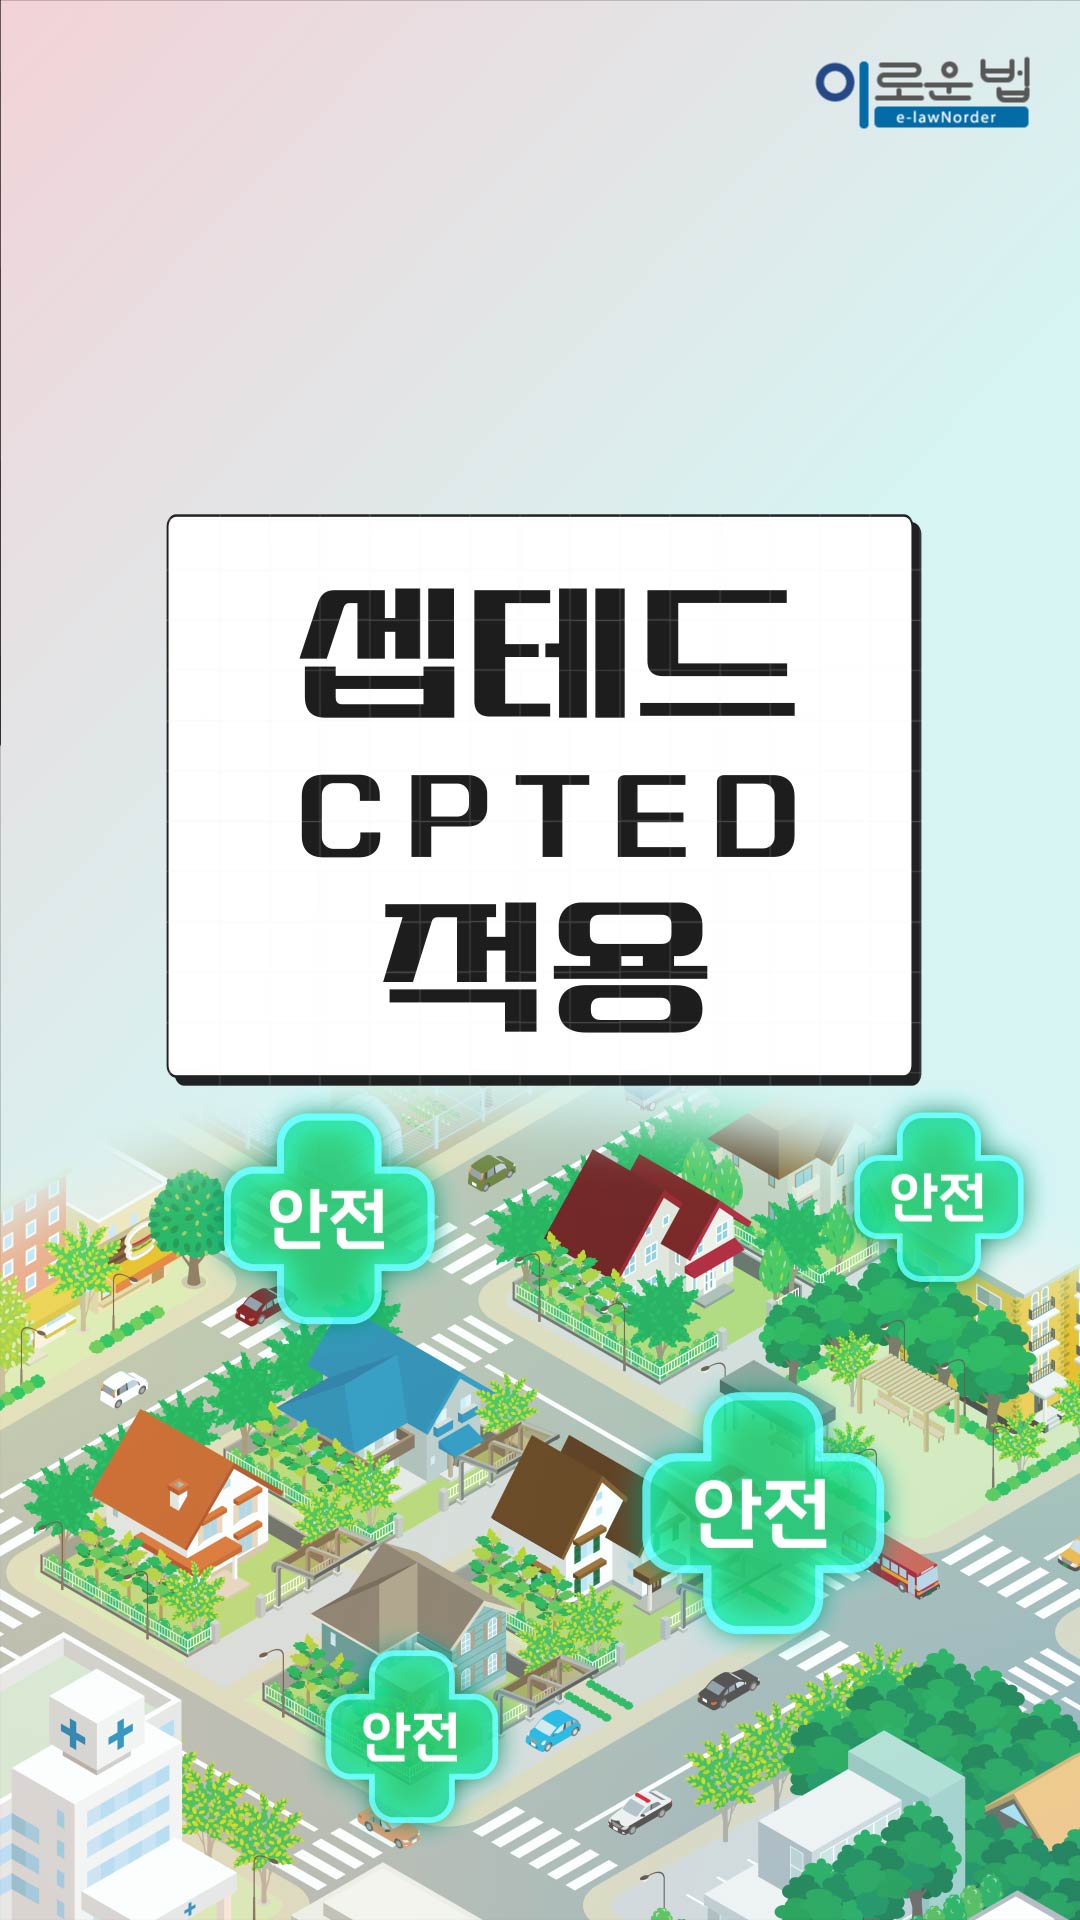 CPTED 적용